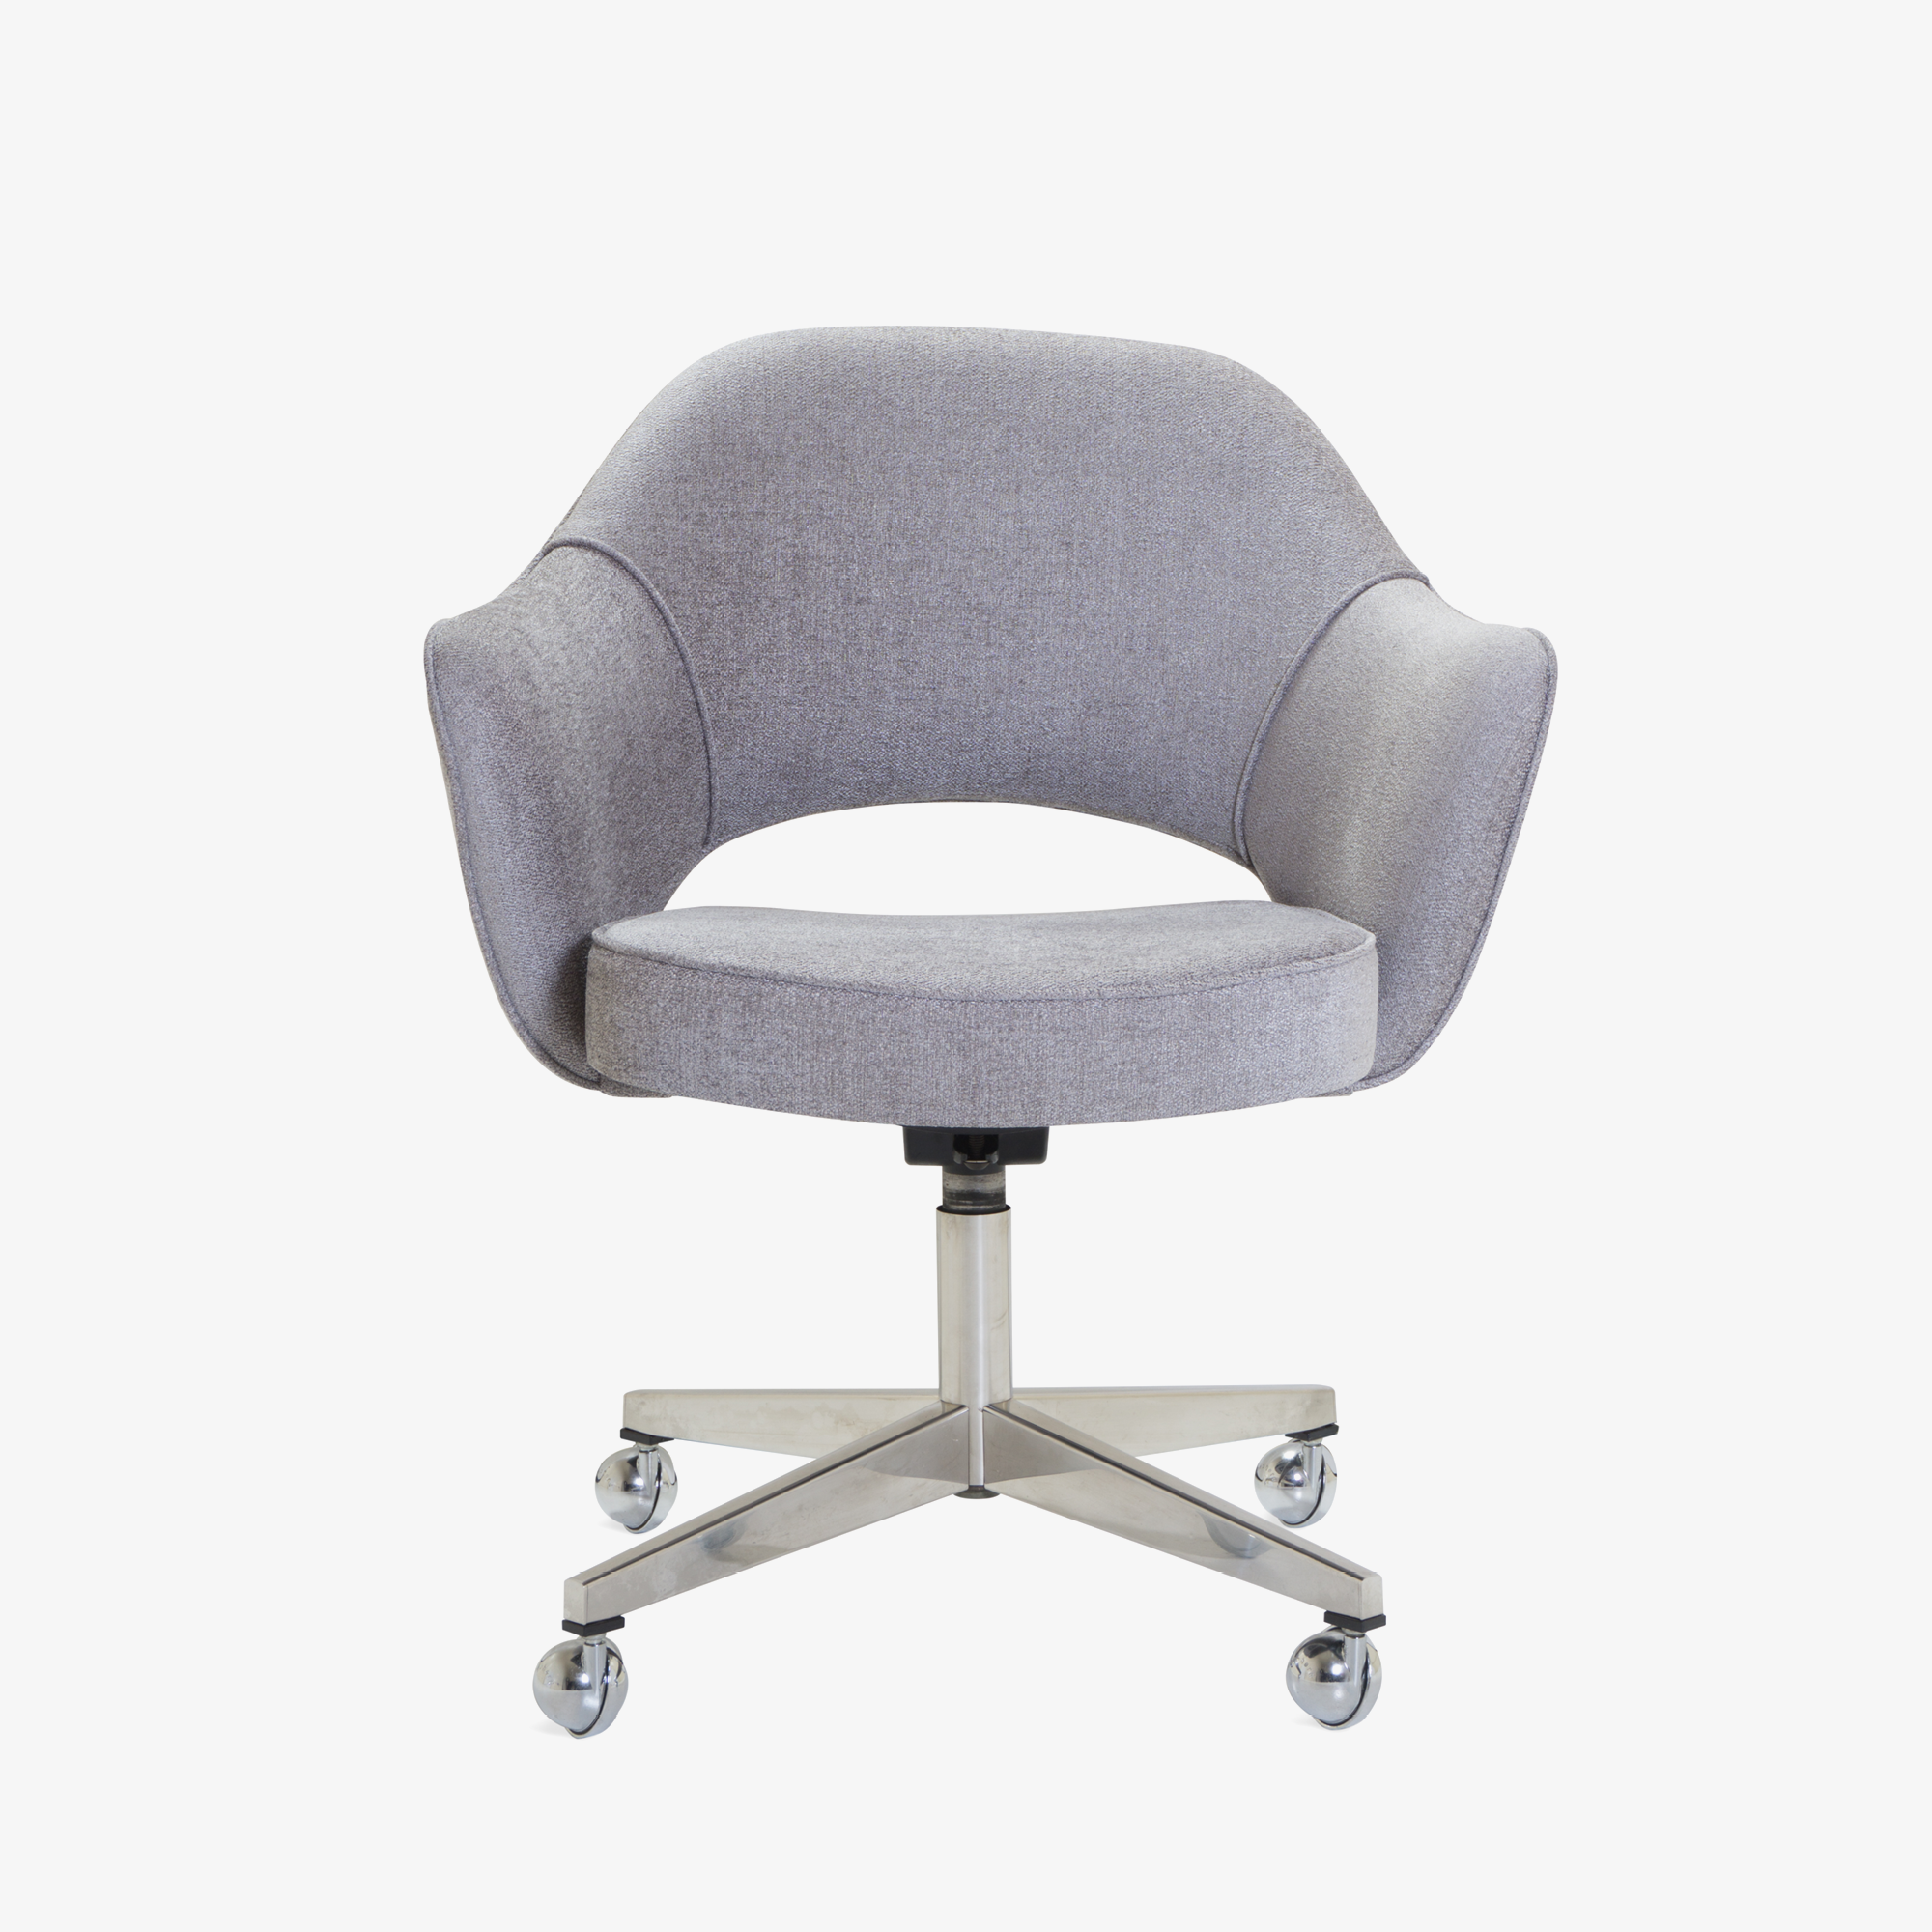 Saarinen Executive Arm Chair in Sterling, Swivel Base2.png